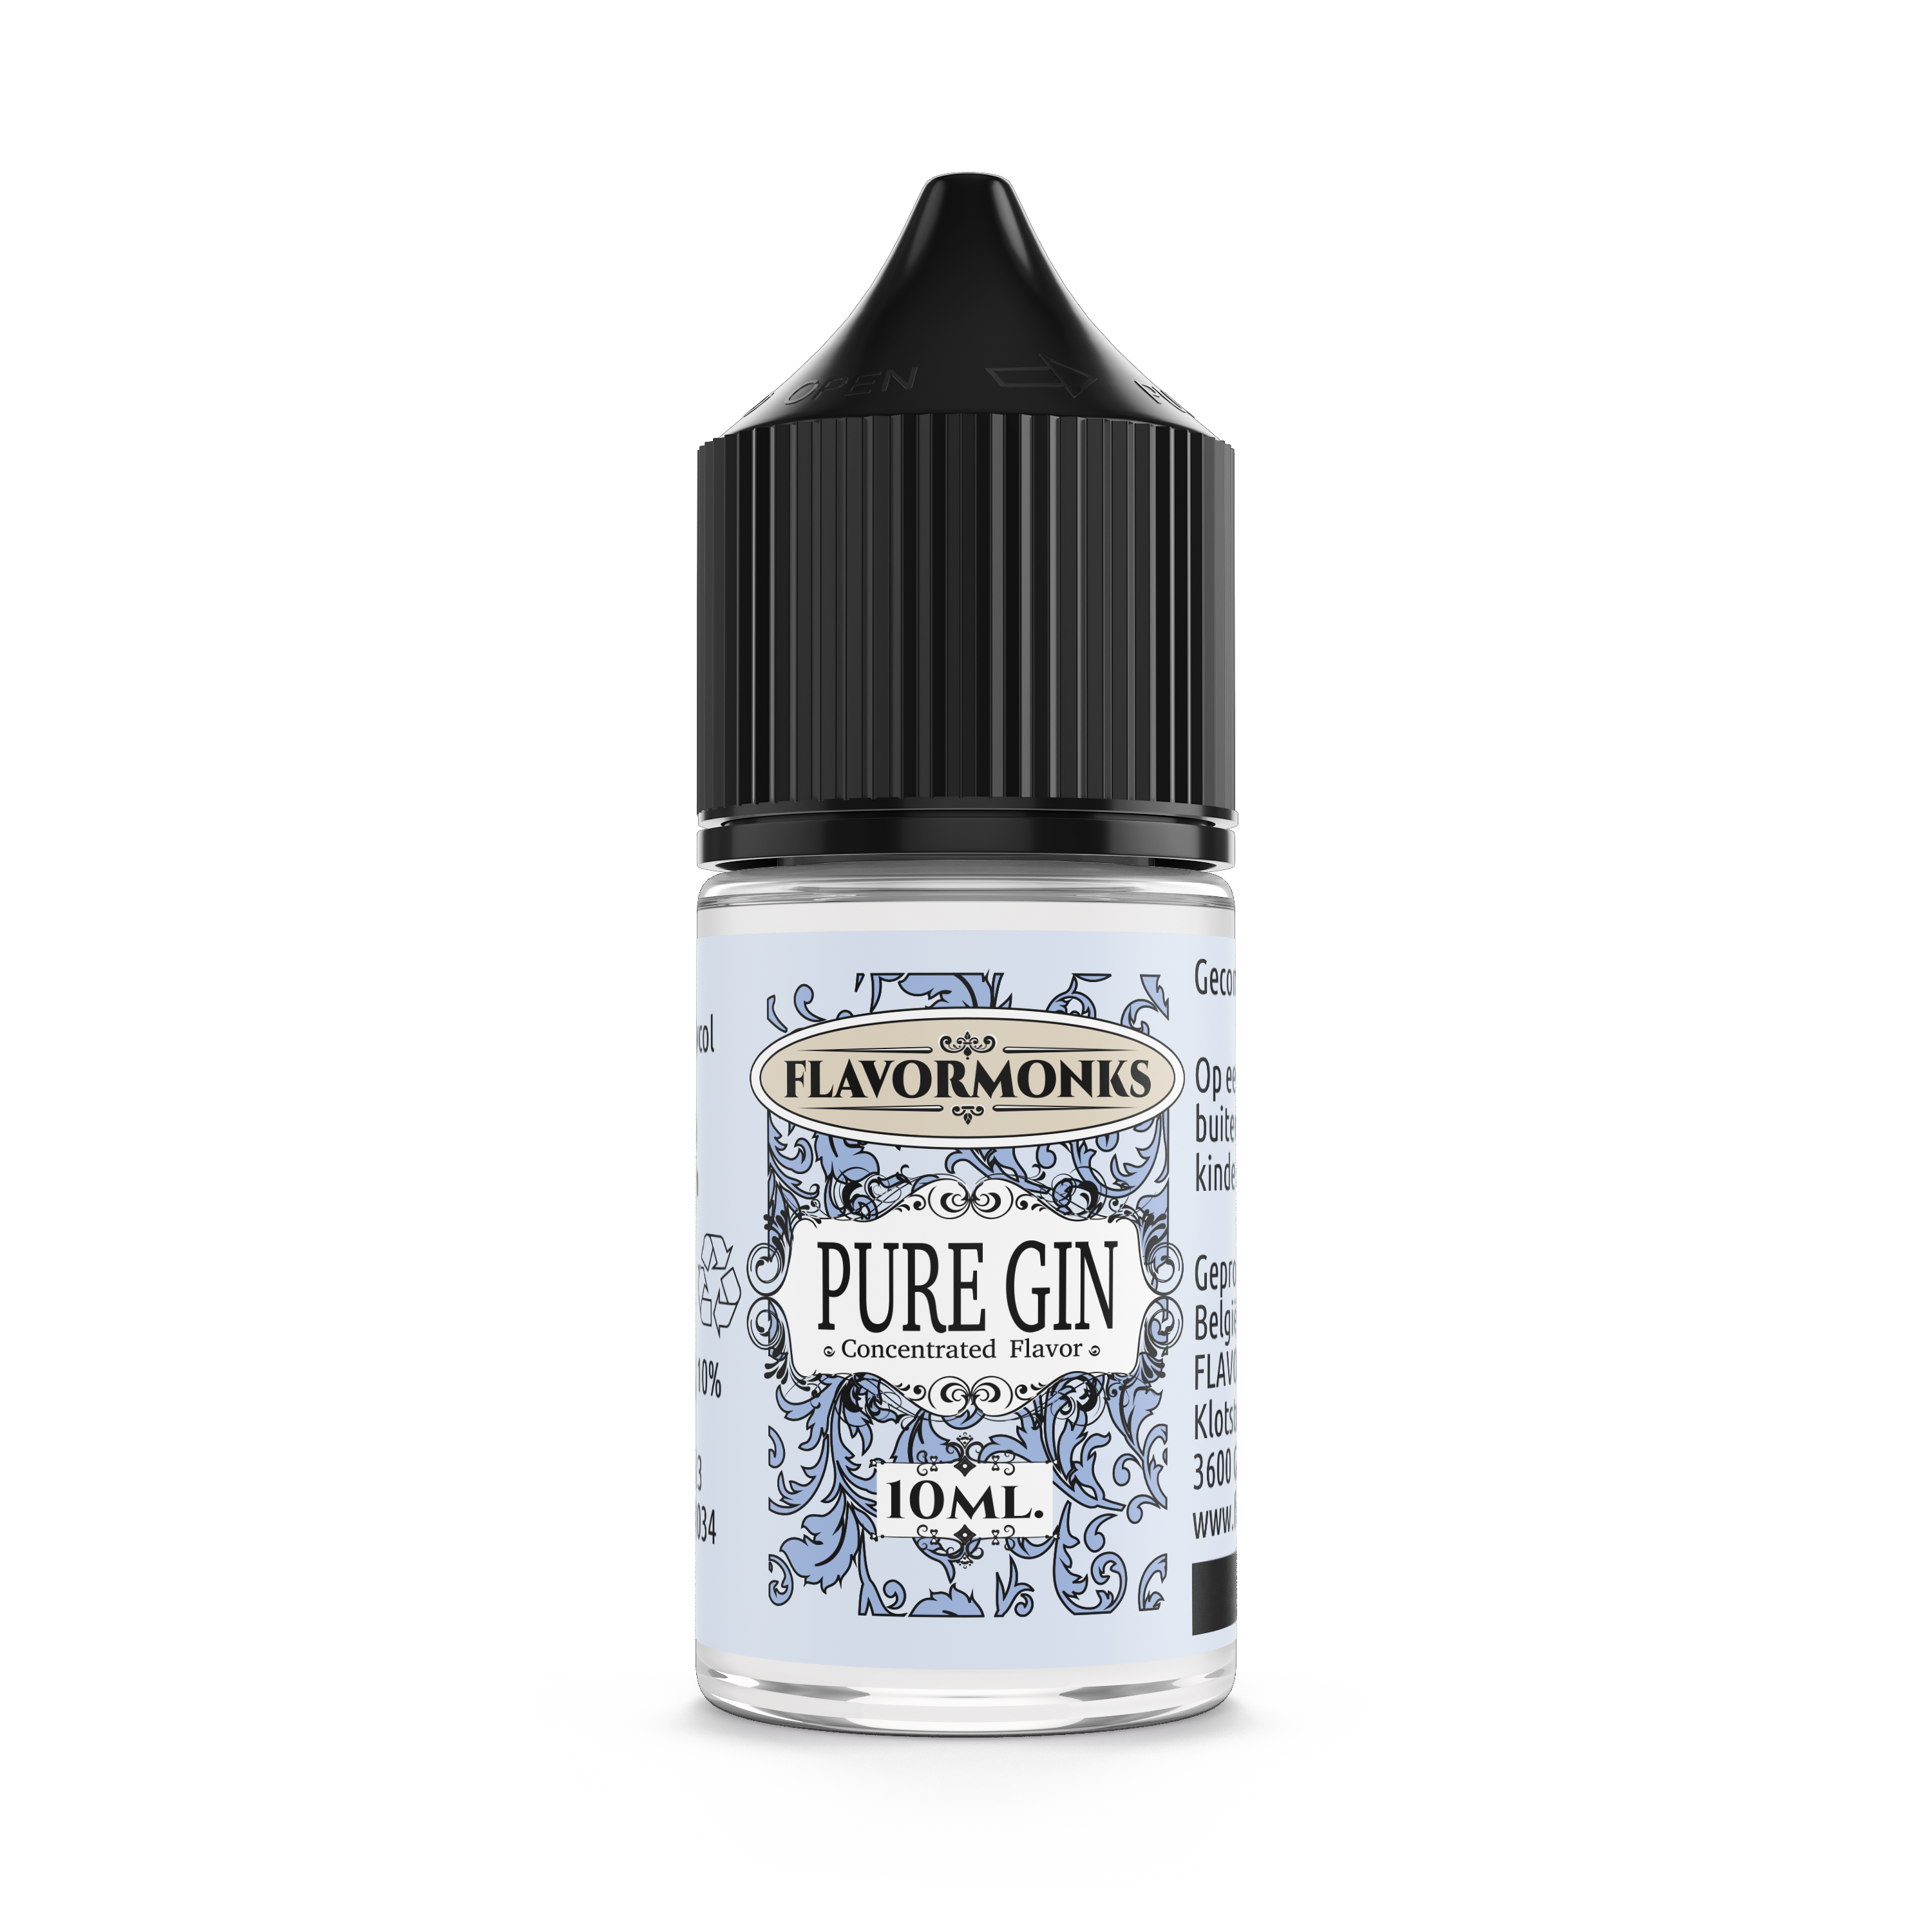 Pure Gin aroma - Flavormonks